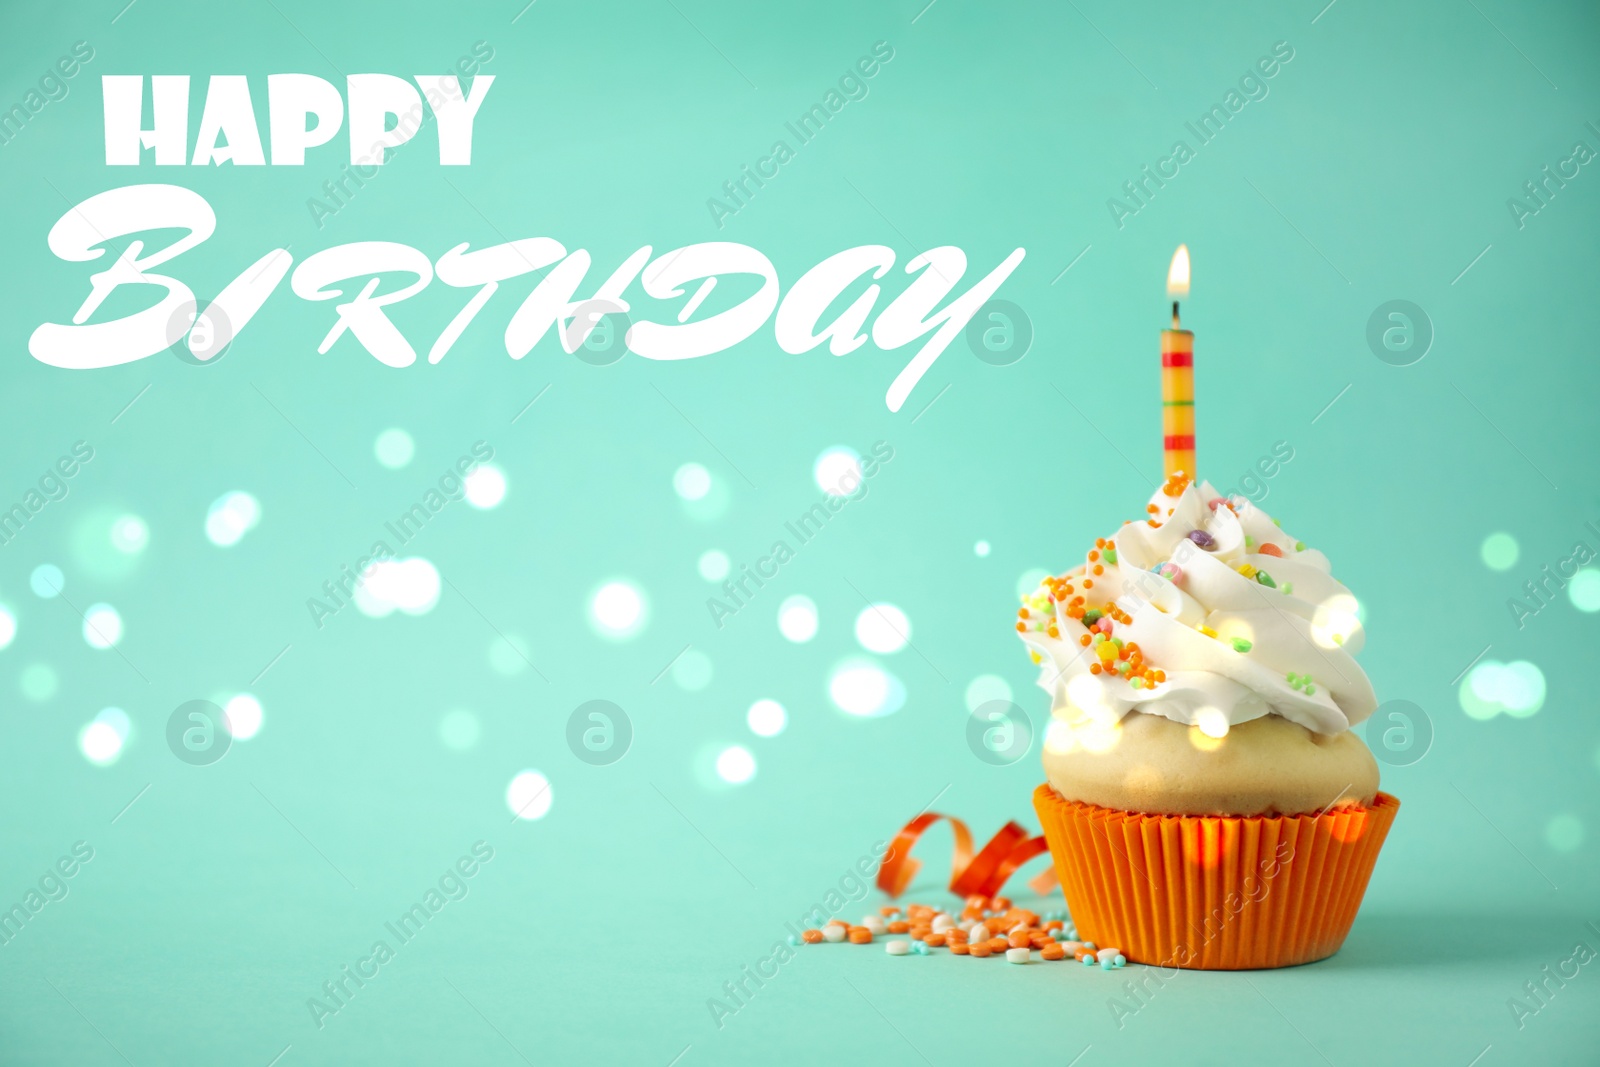 Image of Delicious cupcake with candle on light green background. Happy Birthday